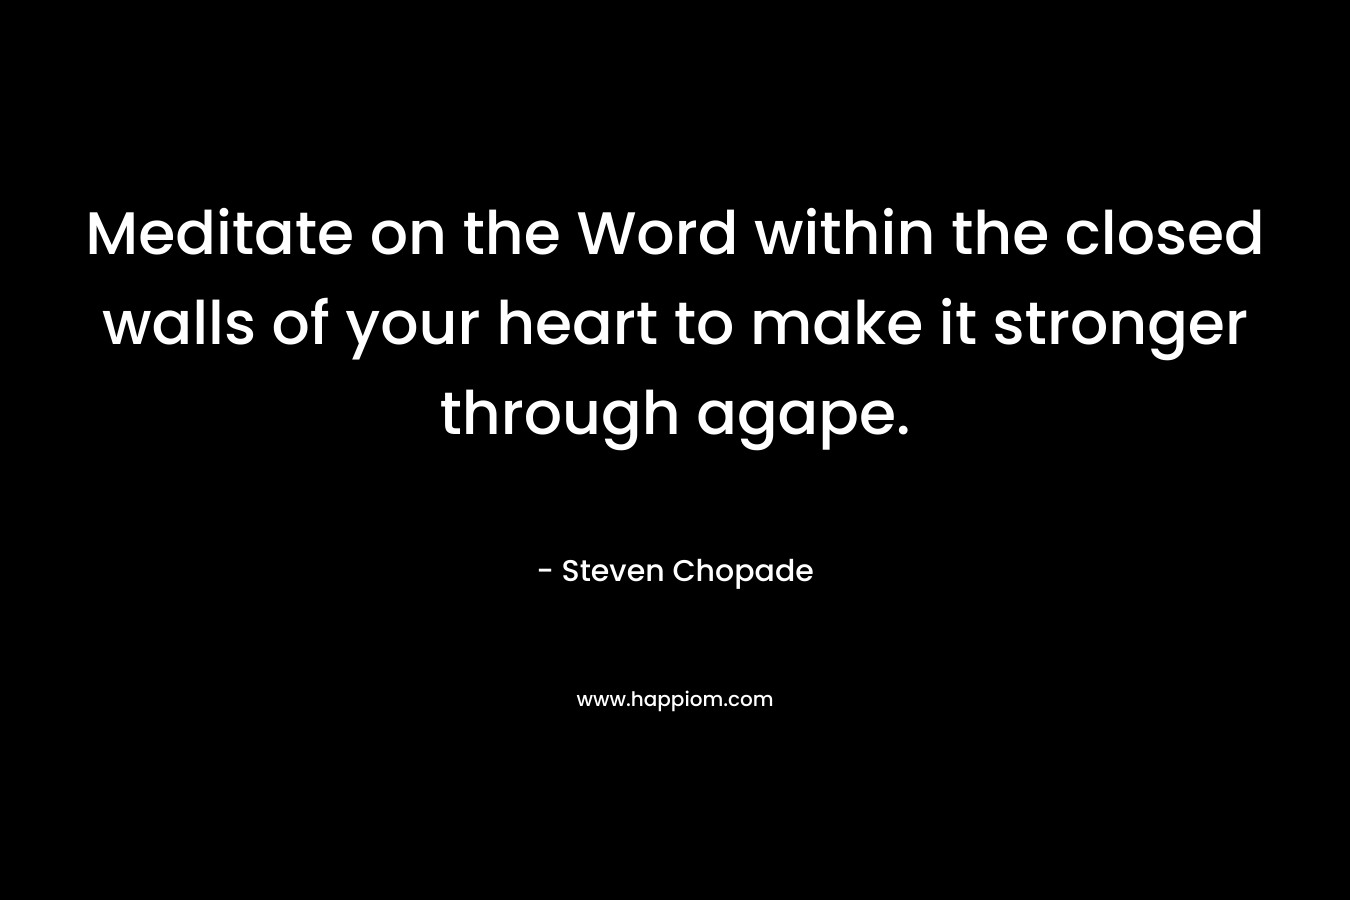 Meditate on the Word within the closed walls of your heart to make it stronger through agape.